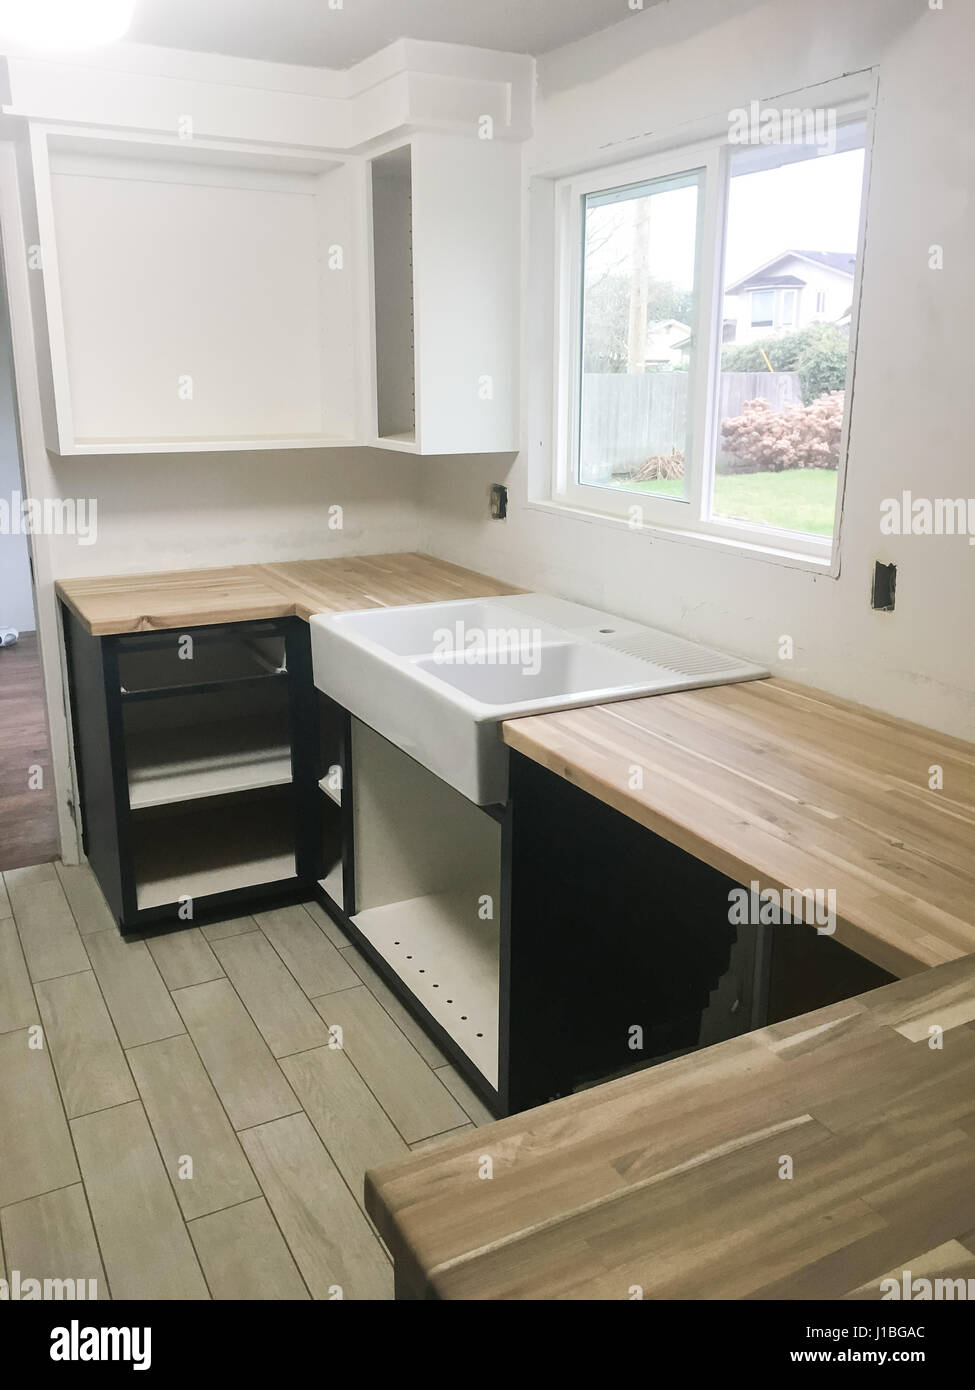 Large farmhouse sink in the kitchen of a full renovation and house remodel. Stock Photo